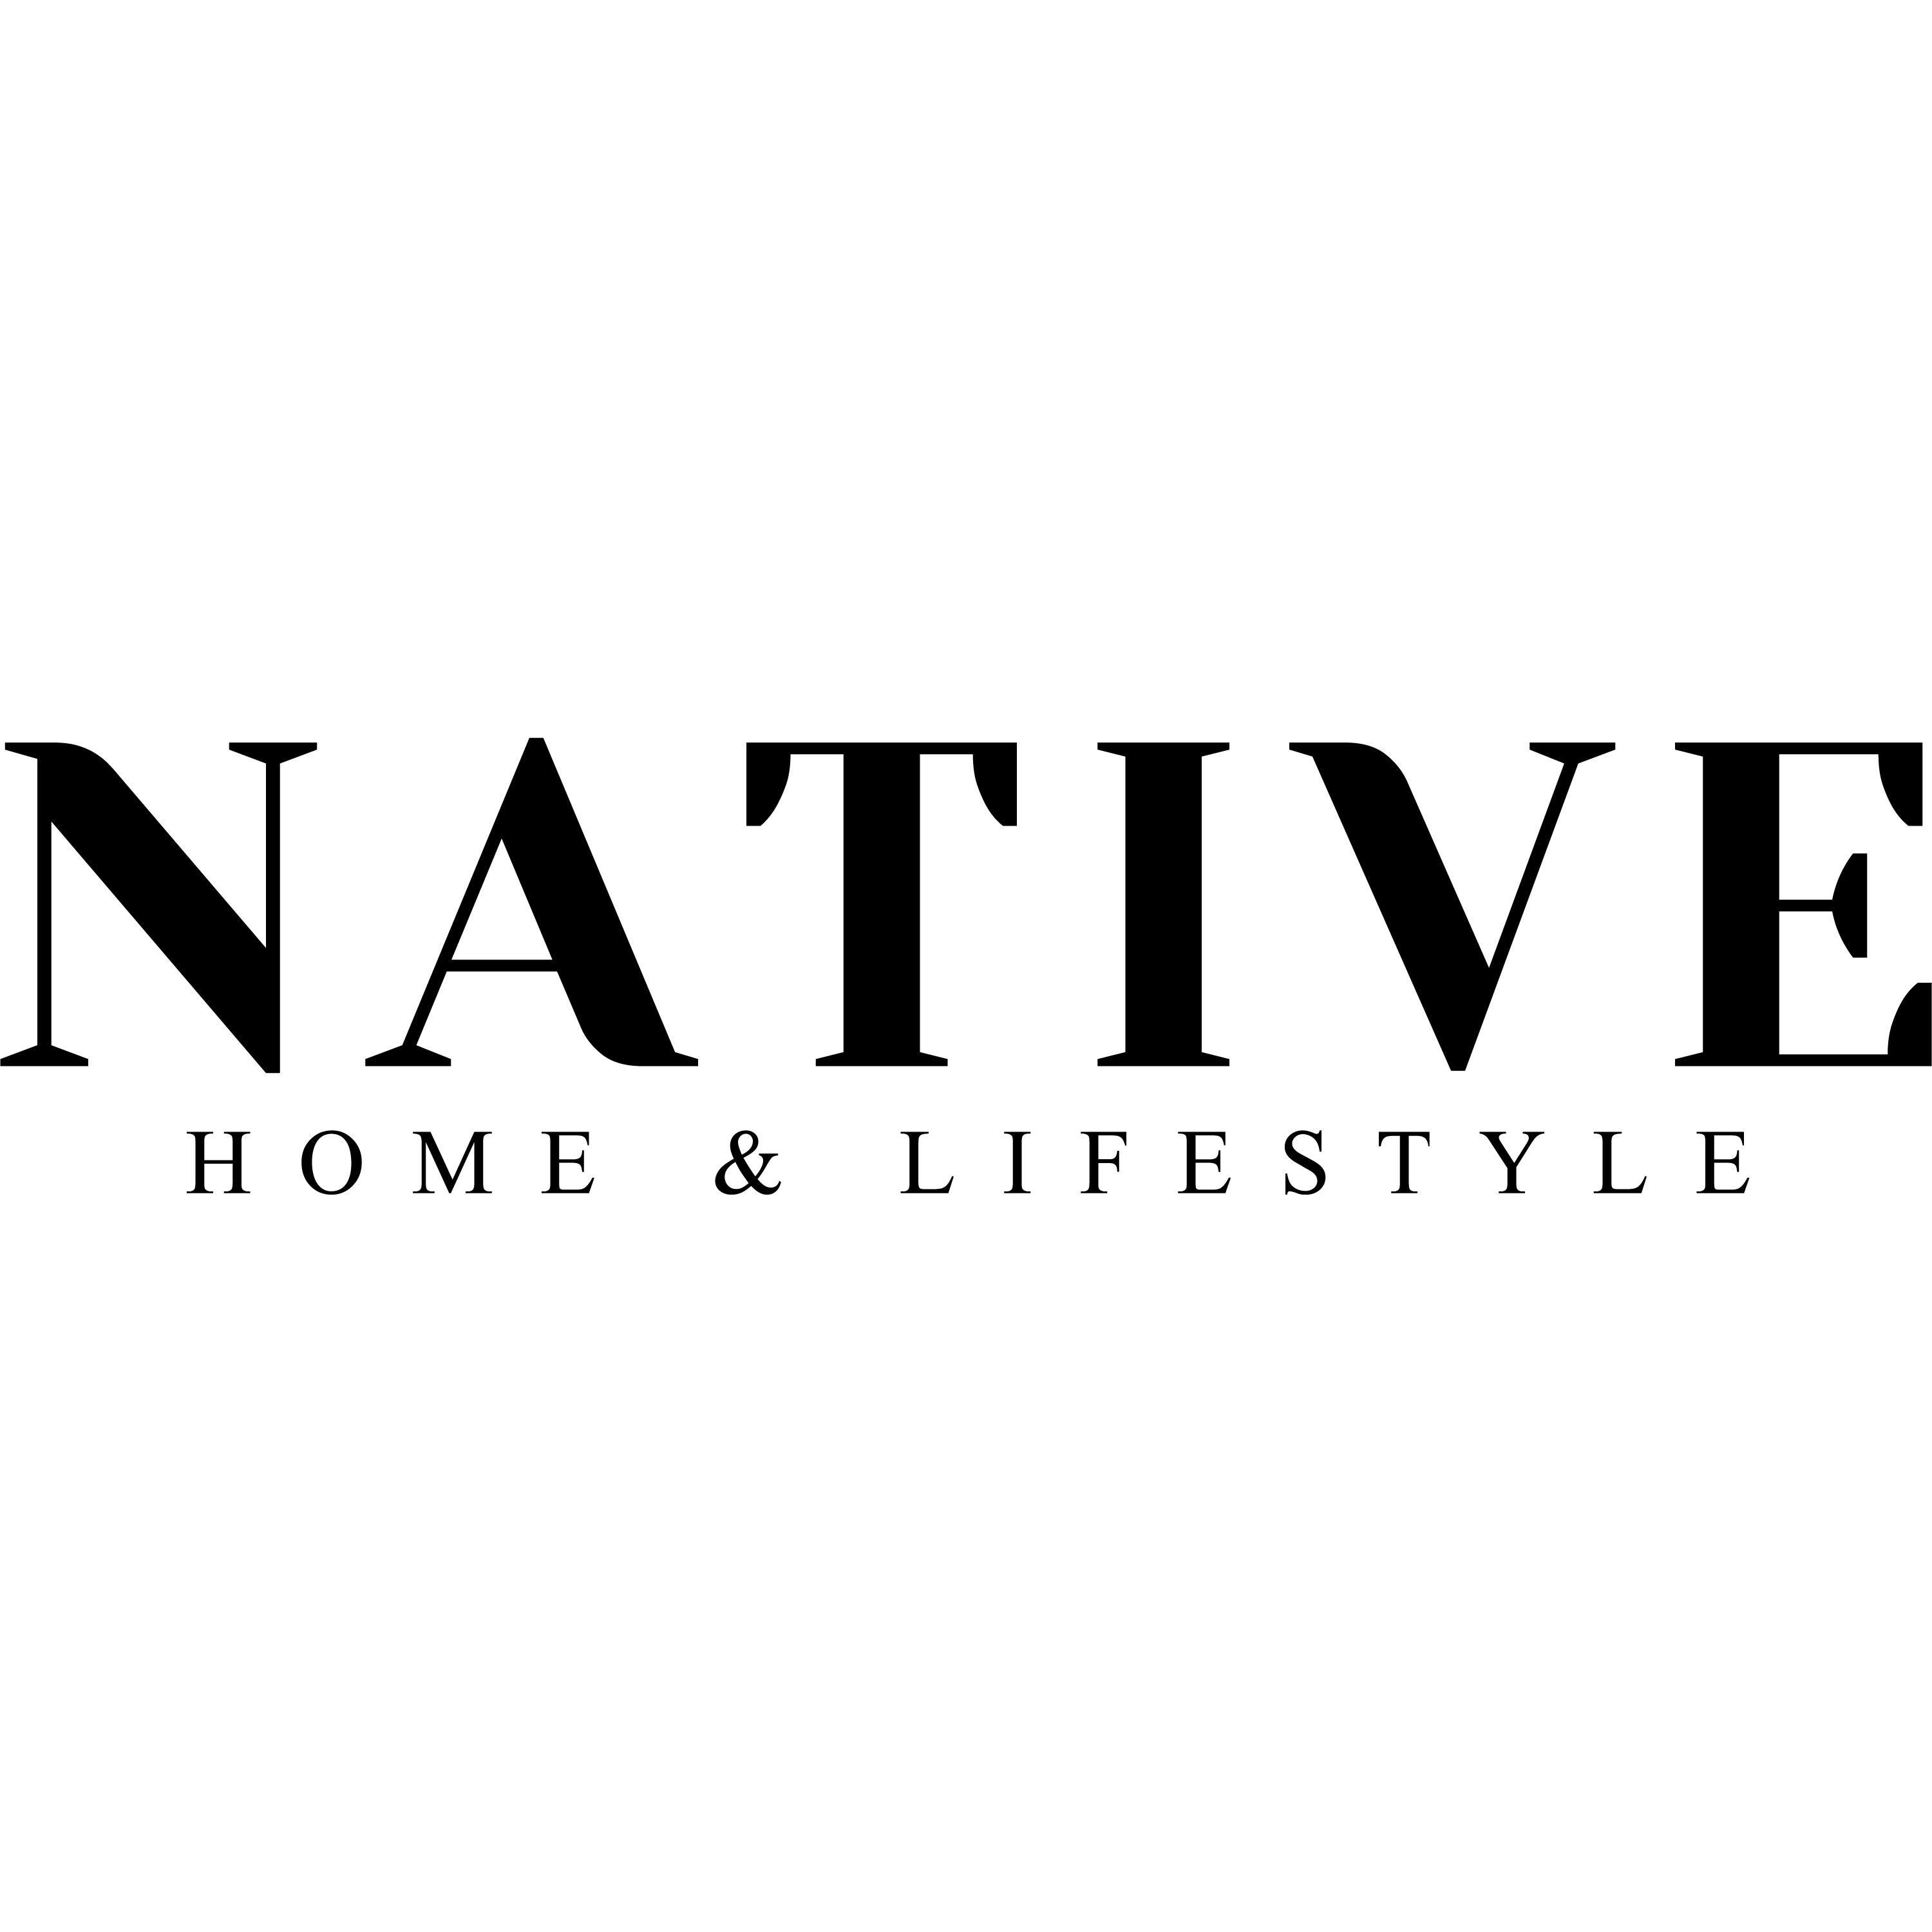 Native Home & Lifestyle